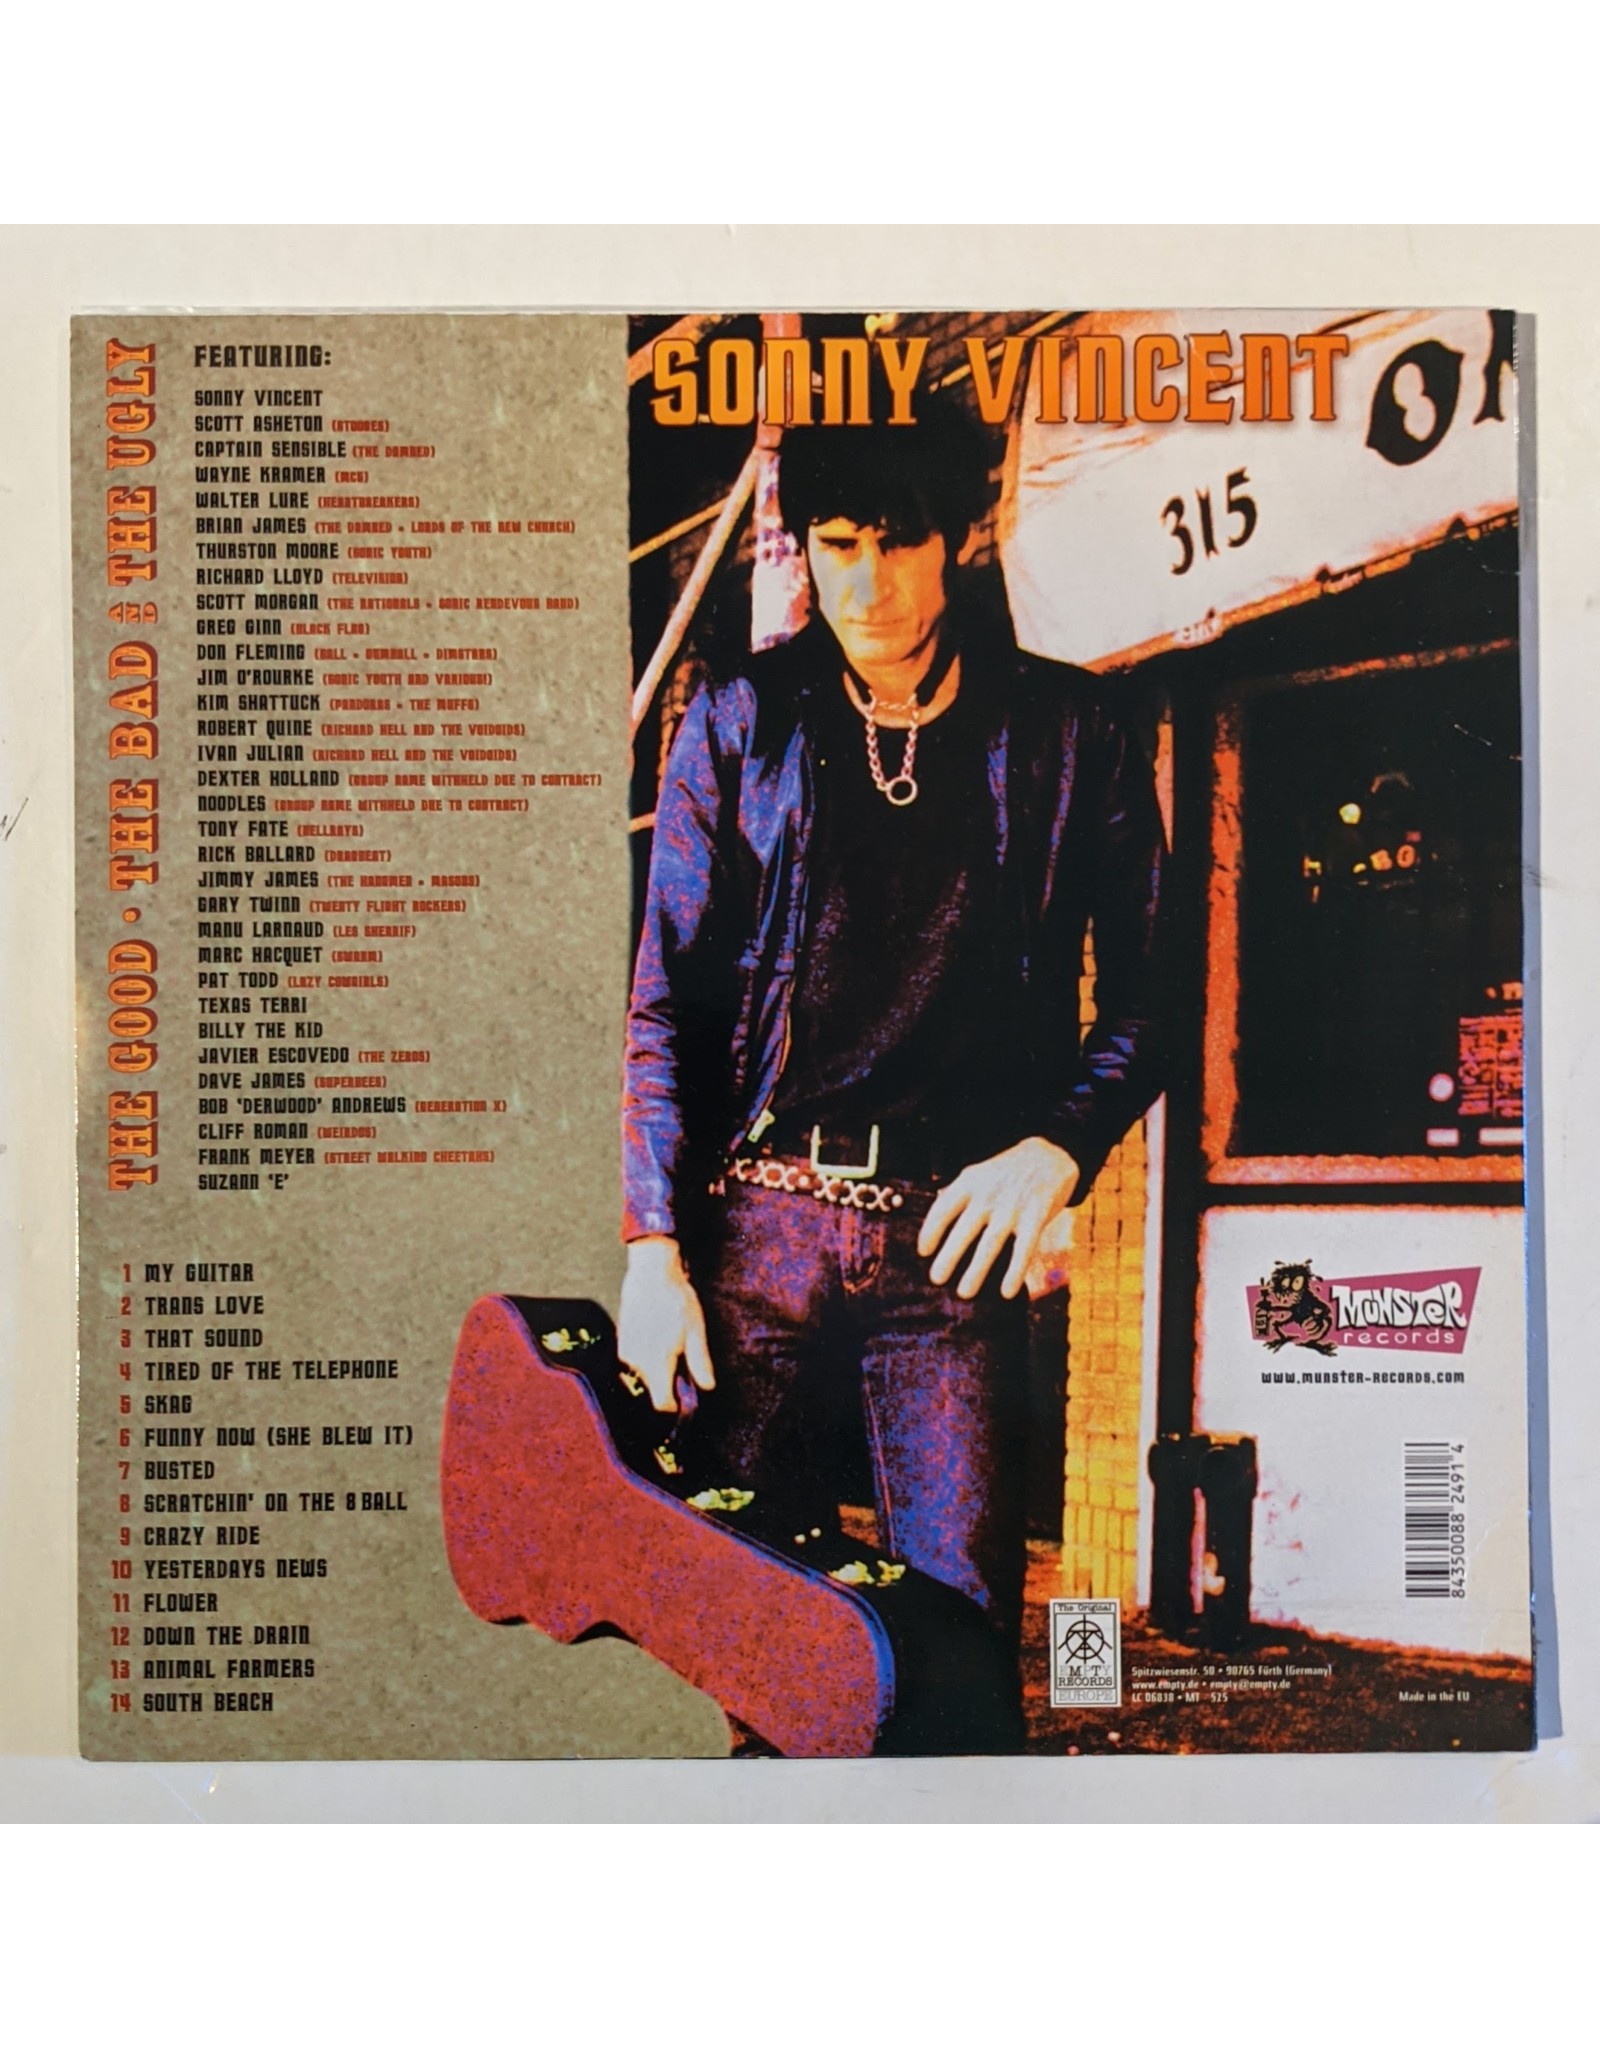 USED: Sonny Vincent: The Good, The Bad, and The Ugly LP